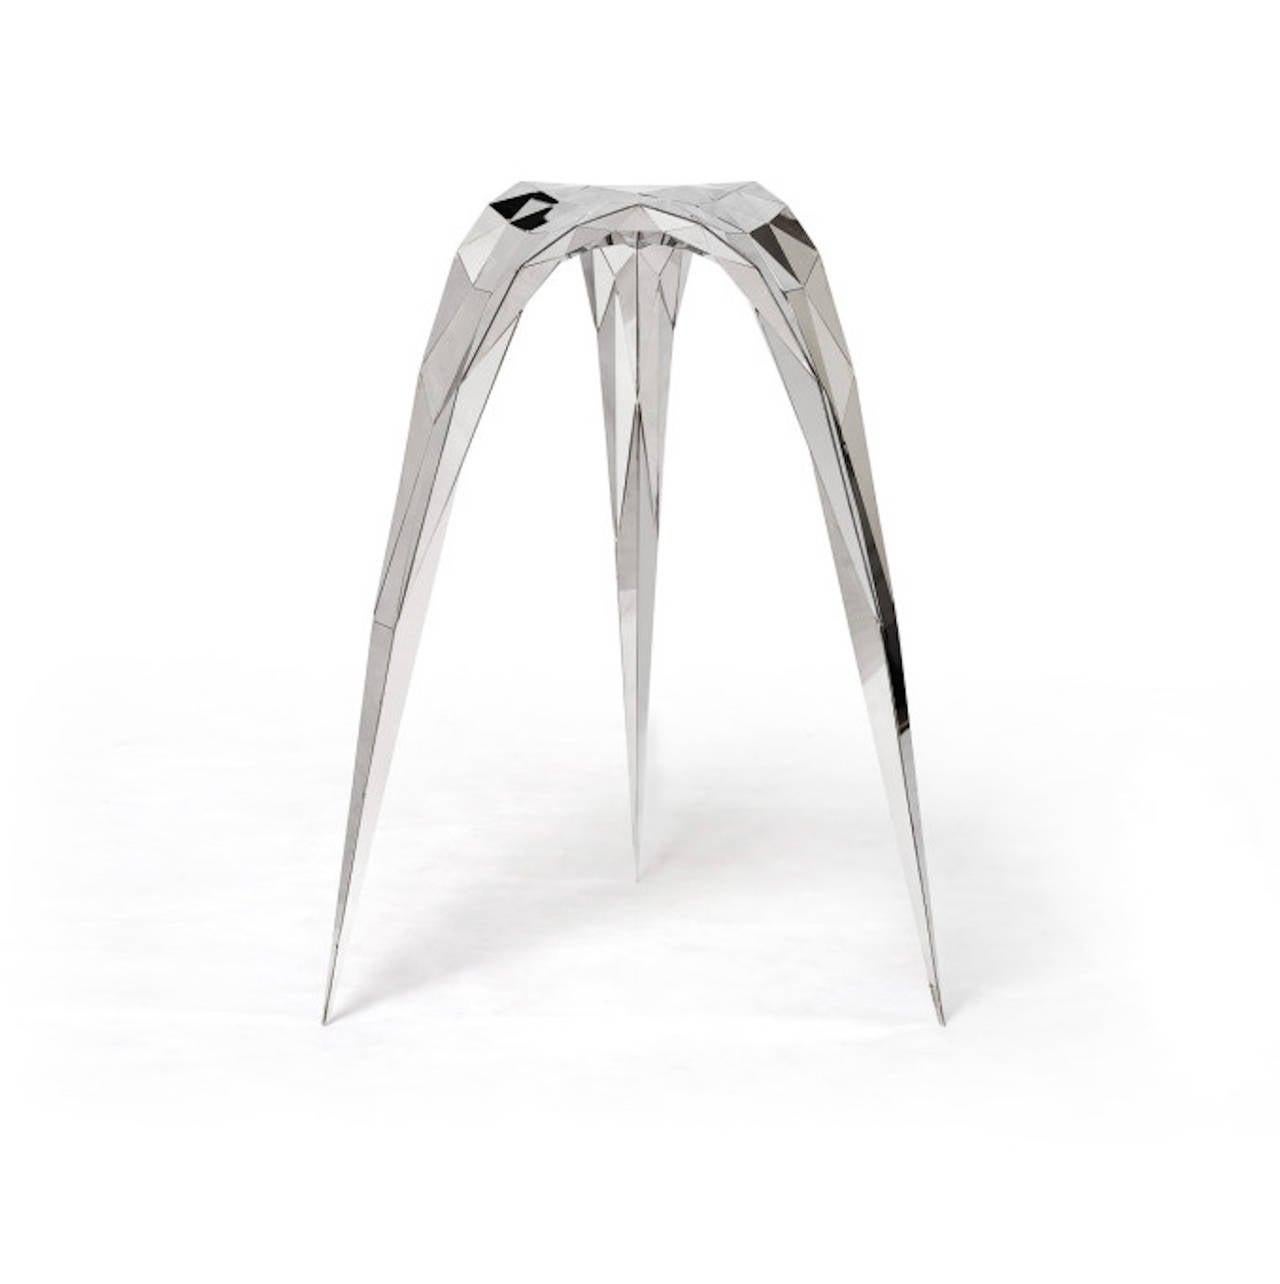 Chinese Polished Stainless Steel Triangle Stool/Side Chair by Zhoujie Zhang For Sale